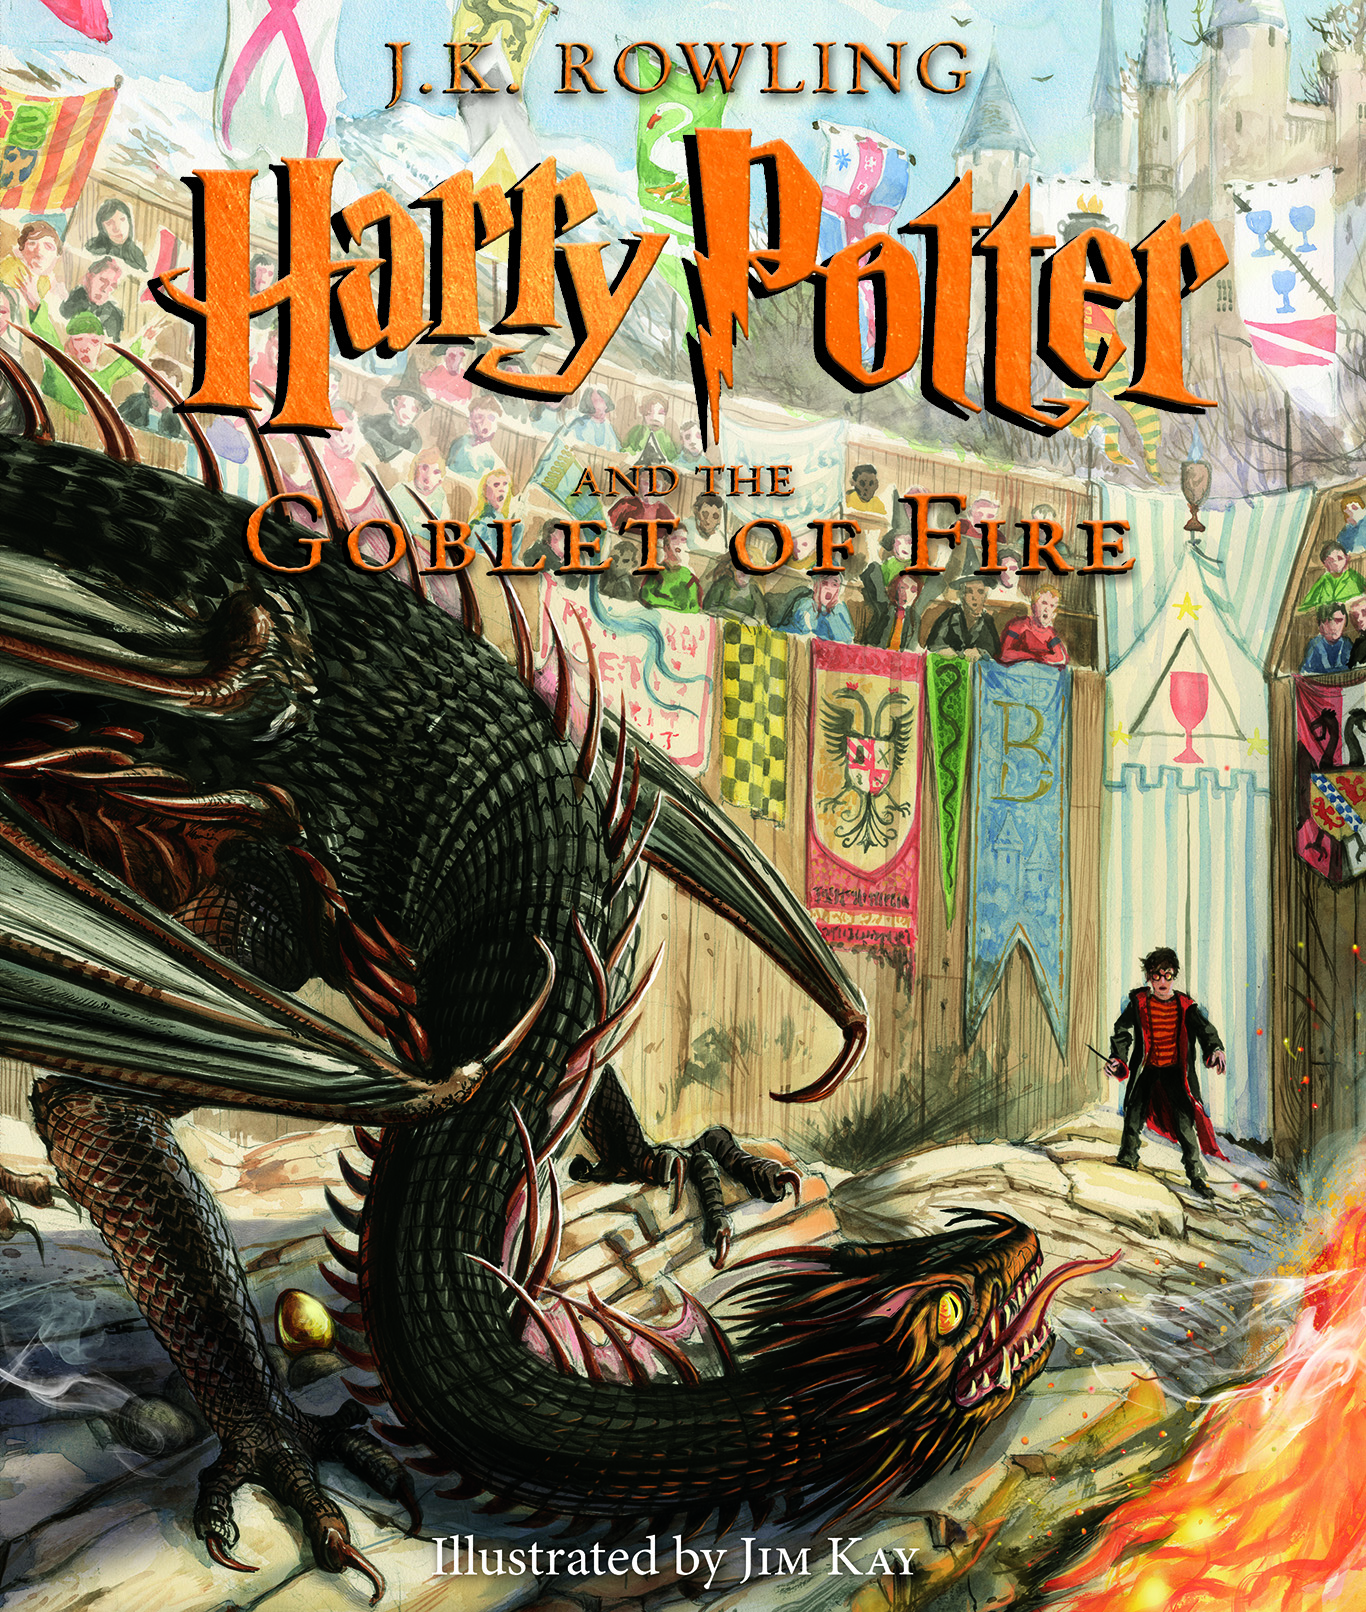 harry potter goblet of fire book cover